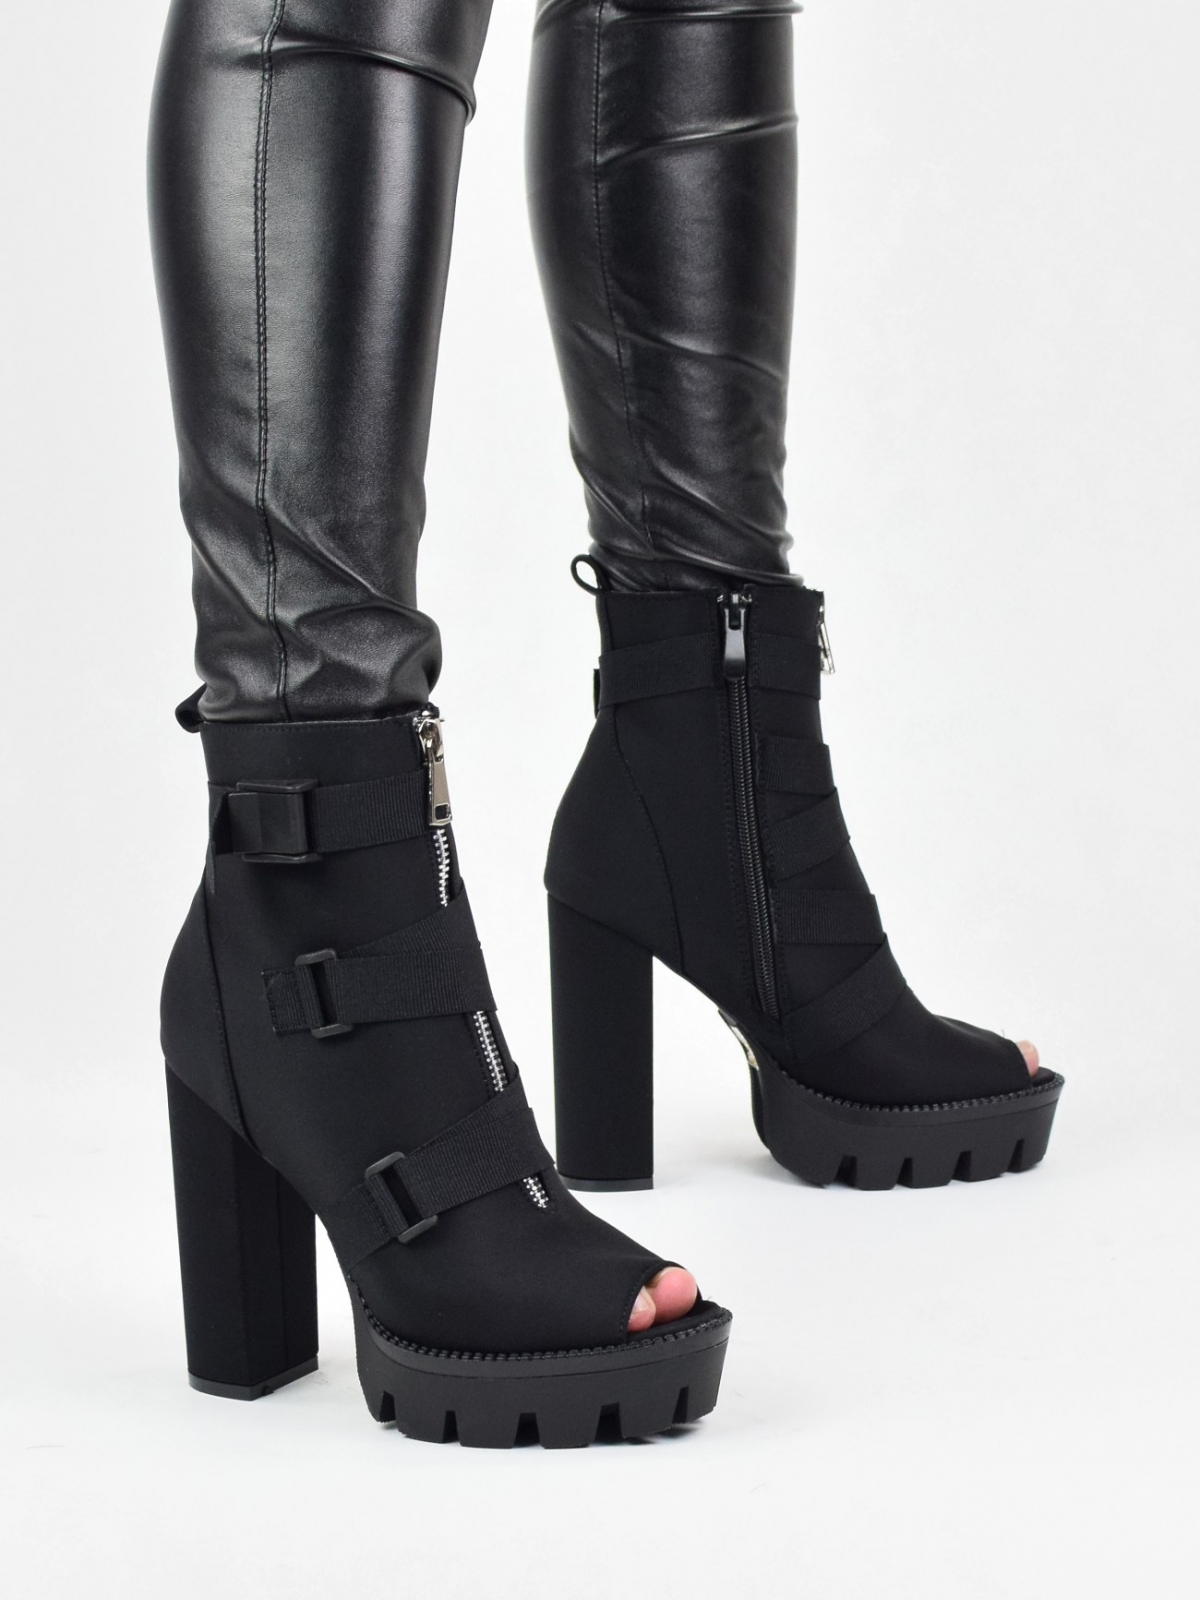 Women's high heeled ankle boots with open toe in black